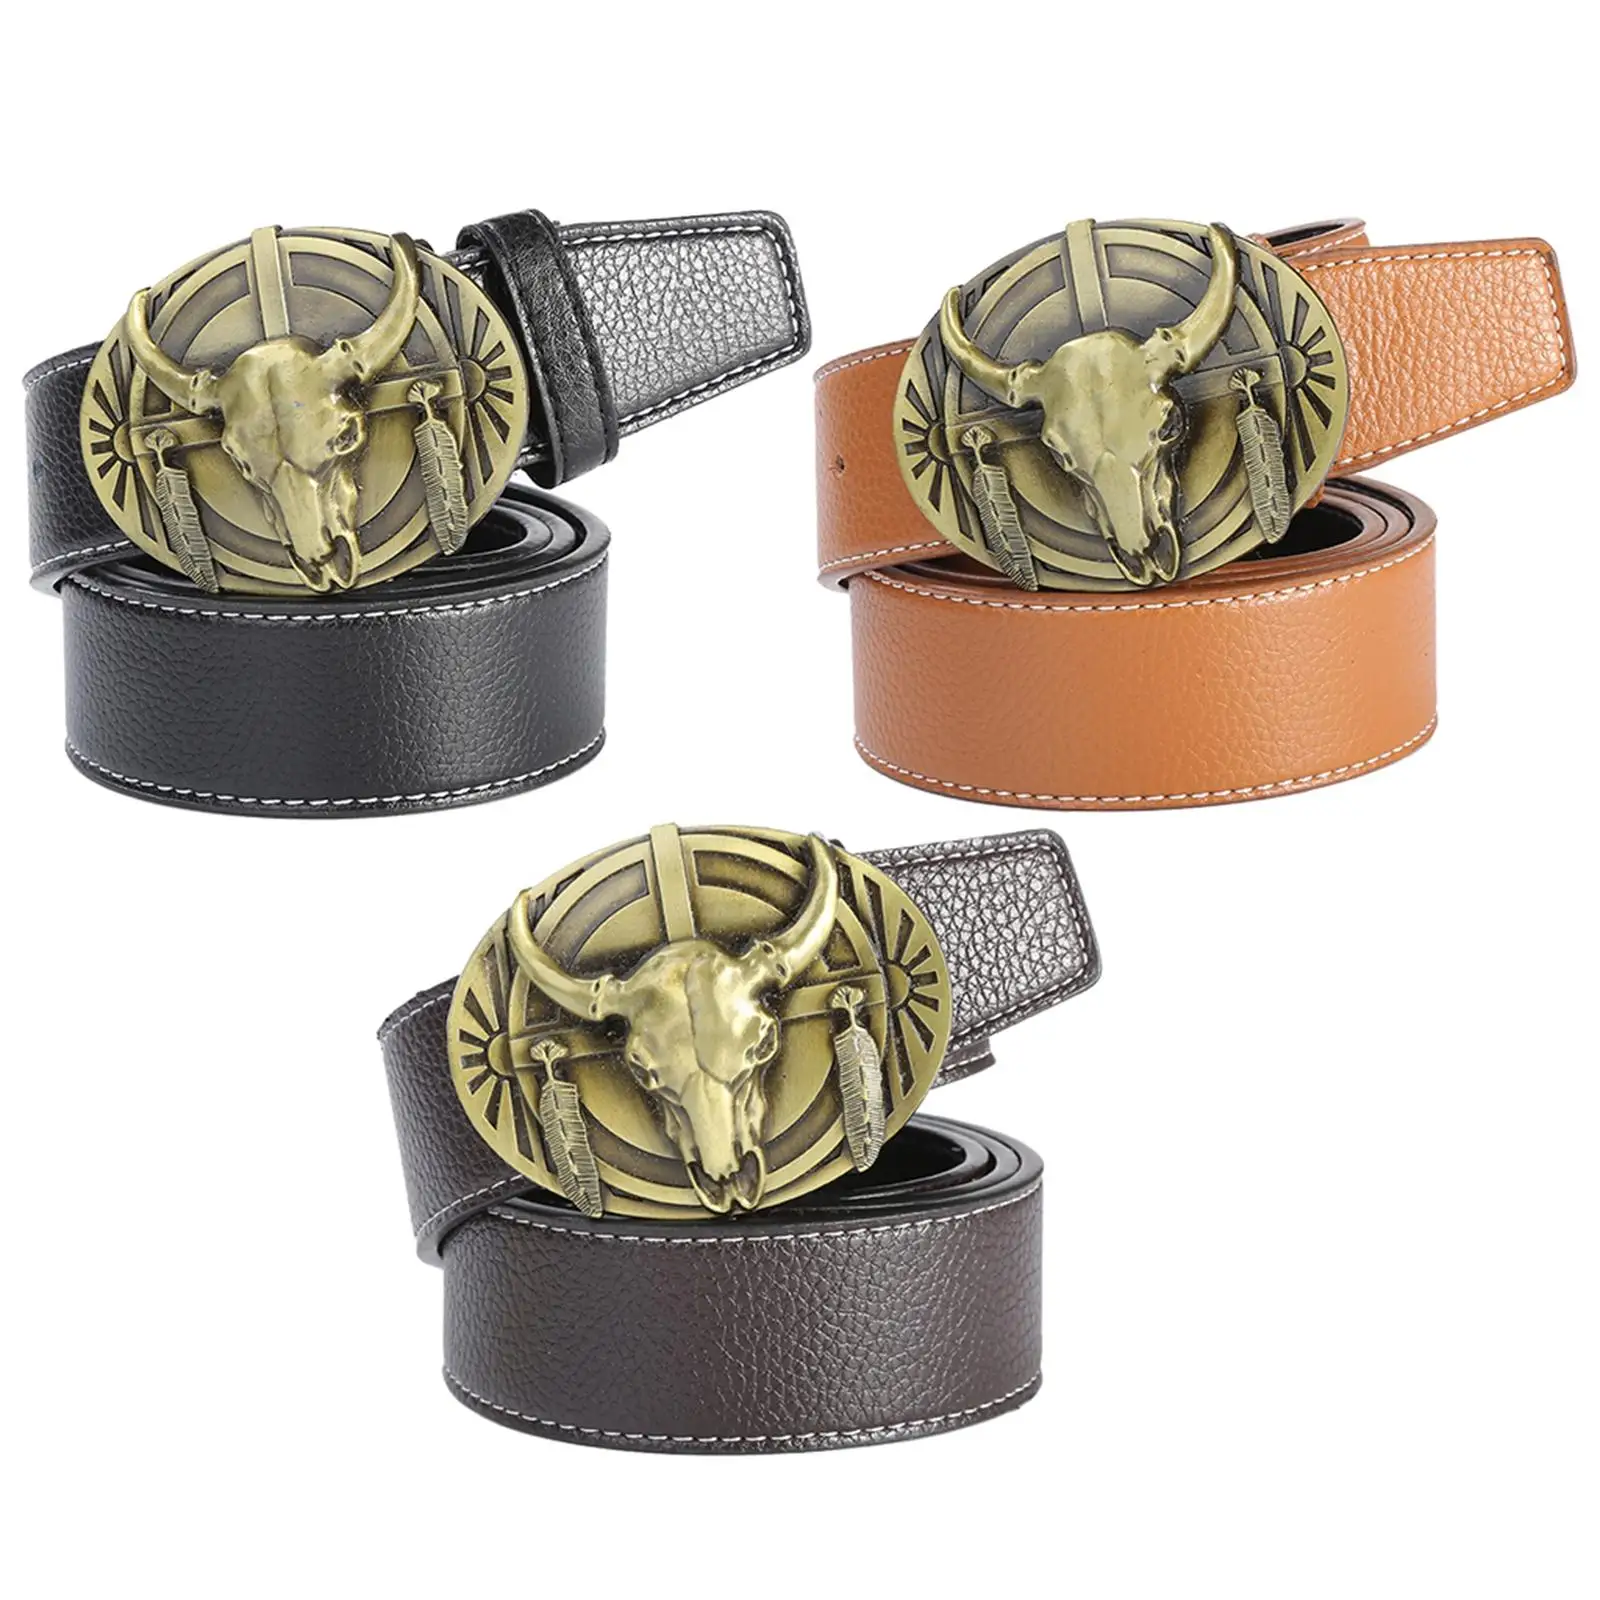 

Western Belt for Men with Buckle 1-1/2" (38mm) Wide 47" Long PU Leather Fashion Casual Vintage for Pants Jeans Cowboy